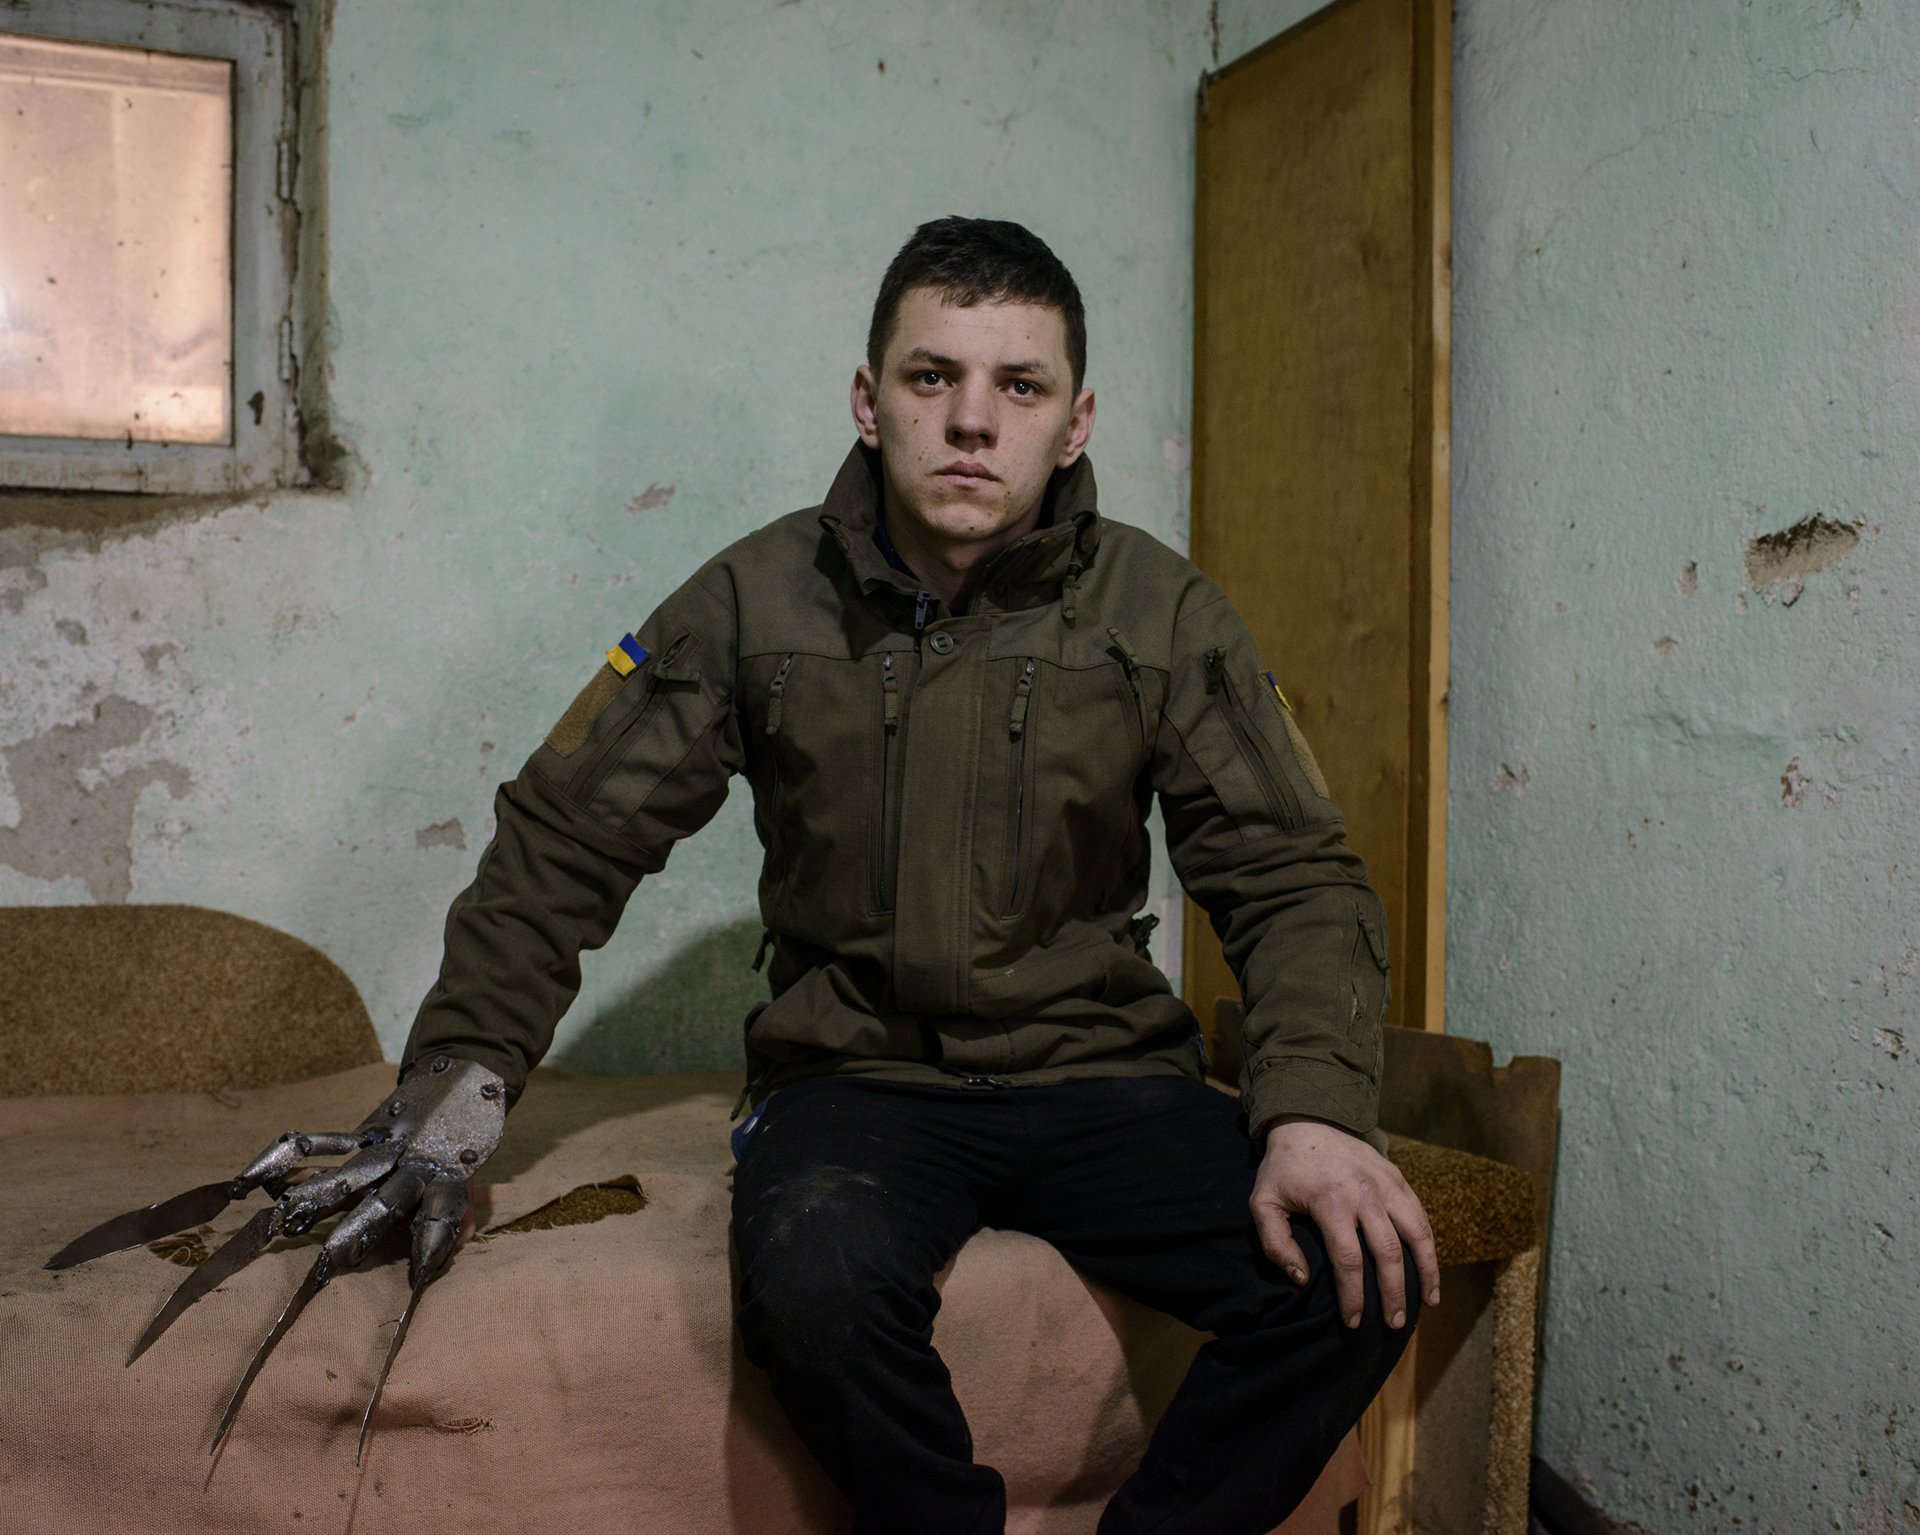 Alexander Yanushkevich wears a metal glove he made as an art object after returning from the front in the conflict between Ukrainian and separatist forces in the Donbas region in eastern Ukraine. Yanushkevich enlisted in the Ukrainian army as a cook in September 2017, and was sent to the front for five months. Since returning, and without work, he has been making metal art objects. The glove was the first one he made.